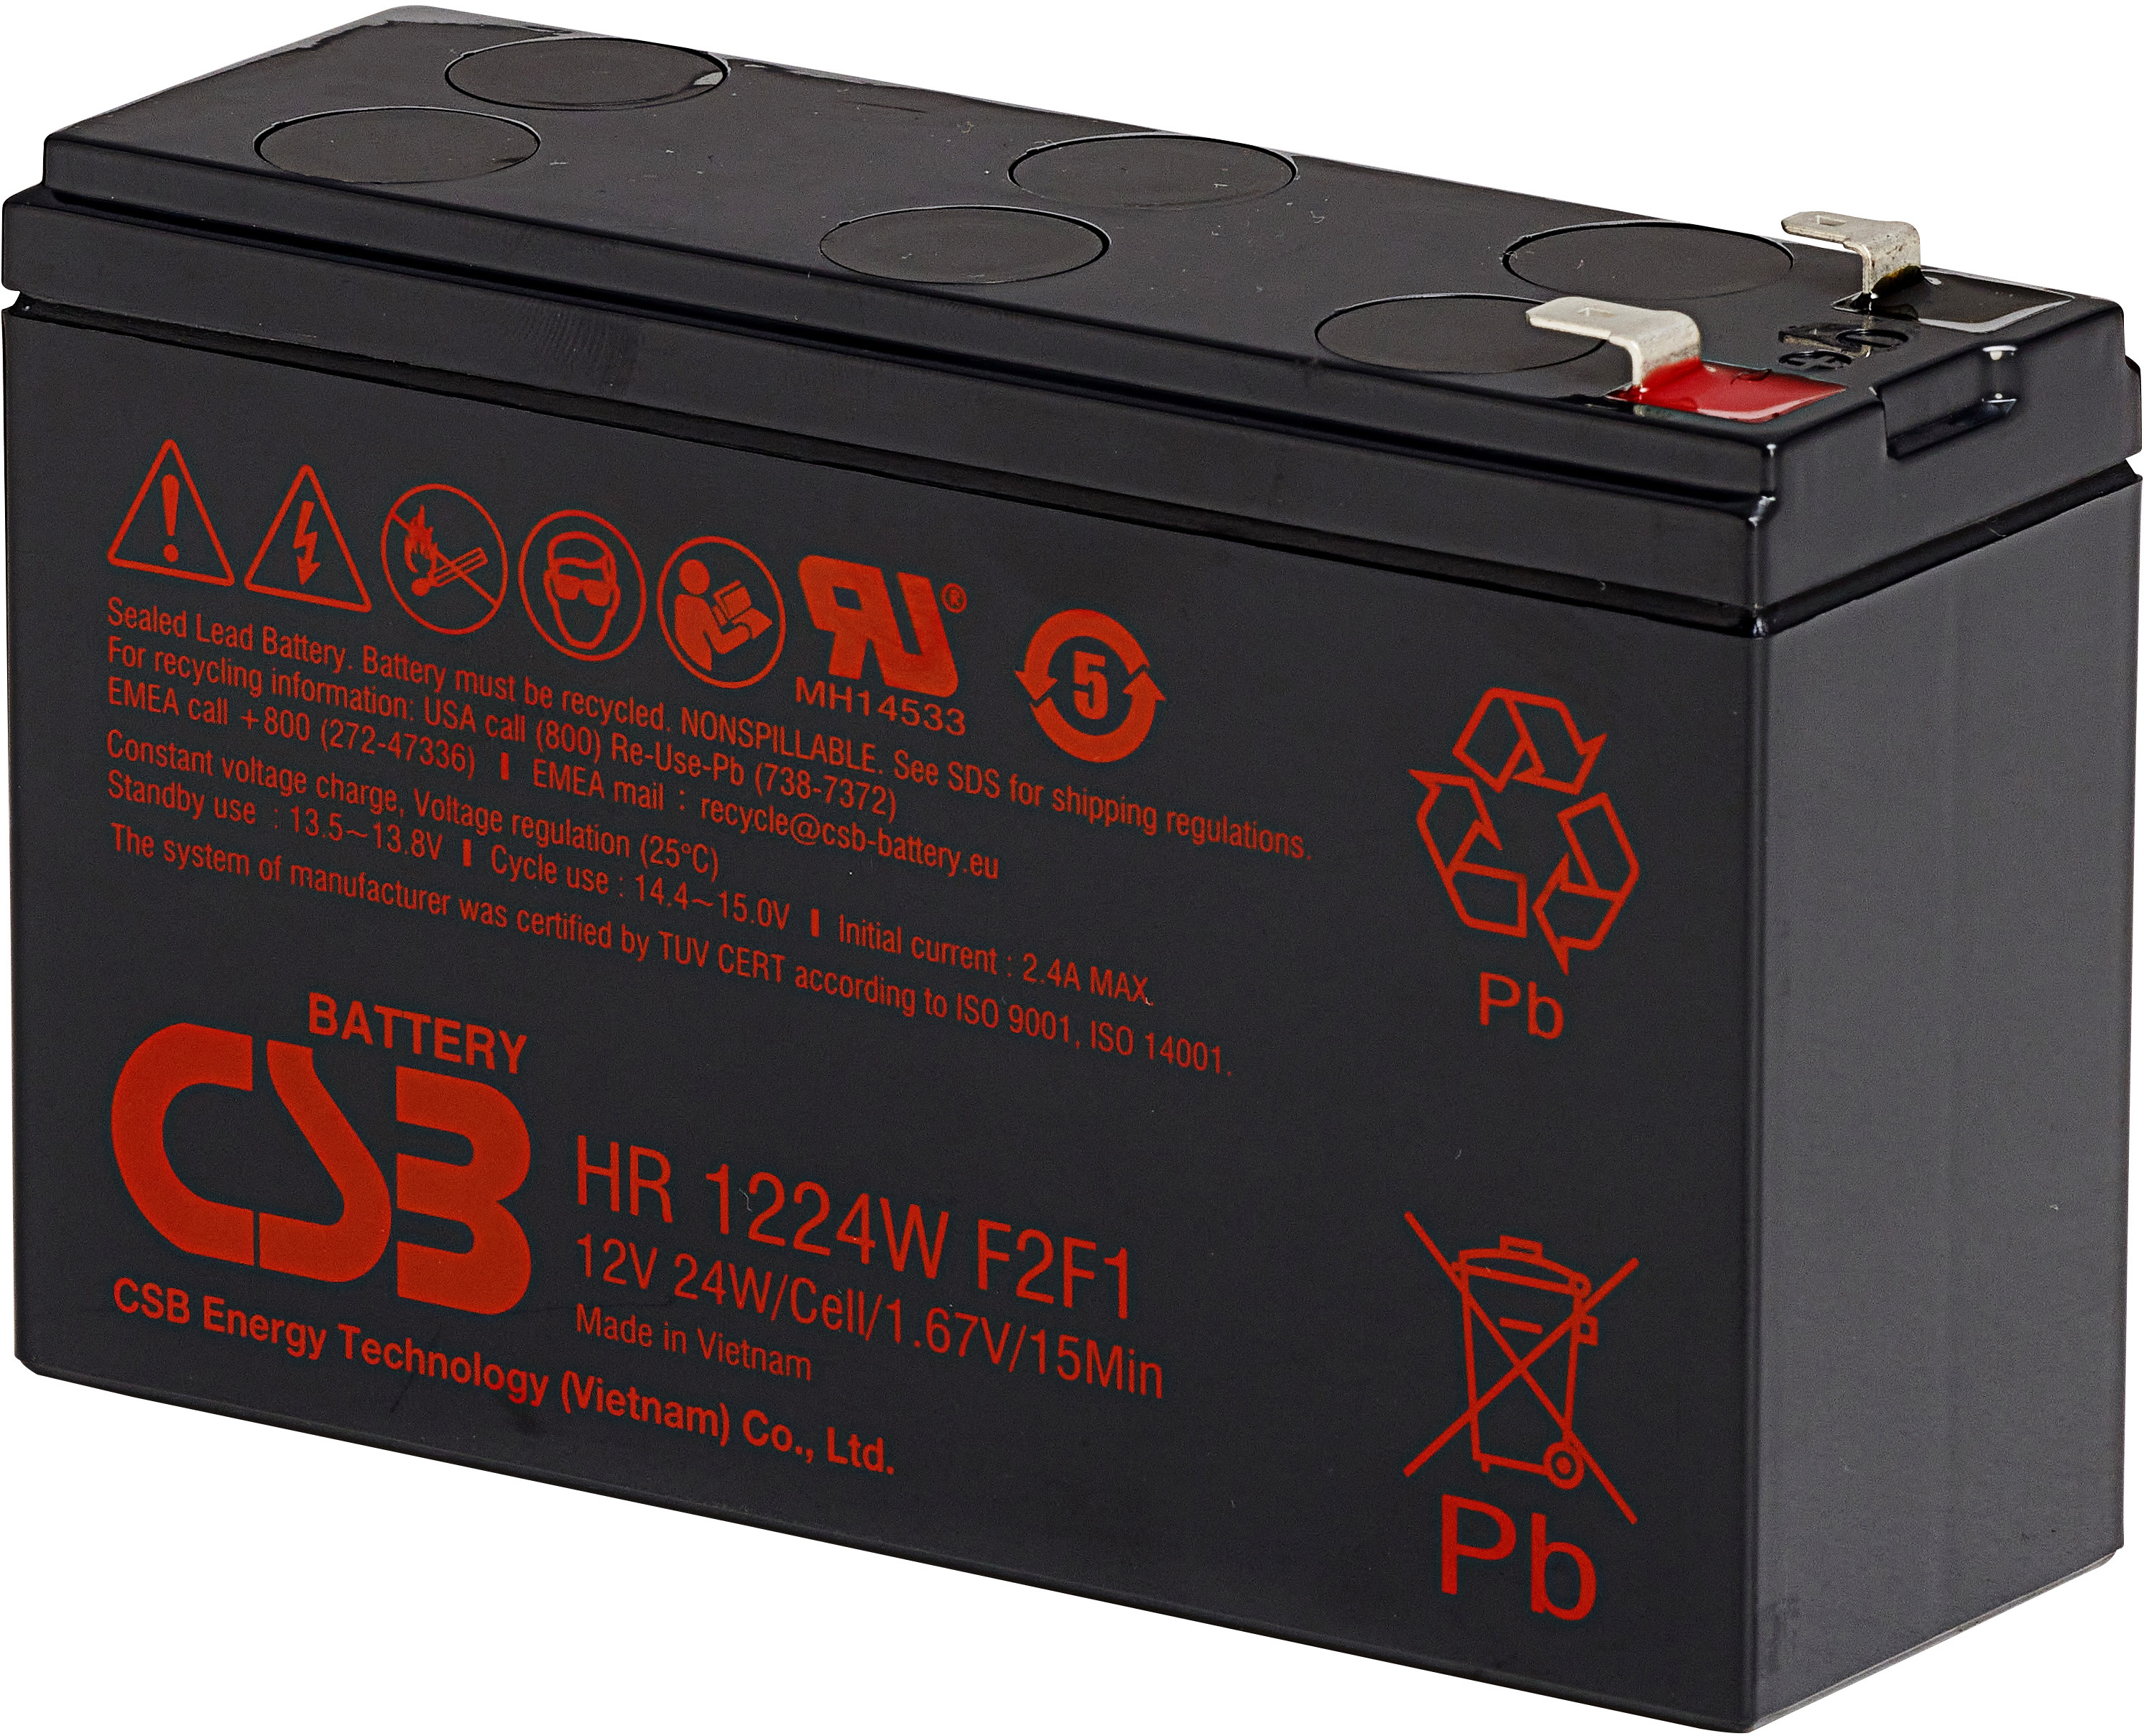 Battery CSB series GP, HR1224W F2 F1, voltage 12V, capacity 24 W/C at 15 min. discharge to U fin. - 1.67 V/Cel at 25°C, (discharge 20 hours), max. discharge current (5 sec.) 130A, short circuit current 260A, max. charge current 2.4A, lead-acid type AGM, terminals F1/F2, LxWxH 150.9x51x98.6mm., weight 1.95kg., service life 5 years.